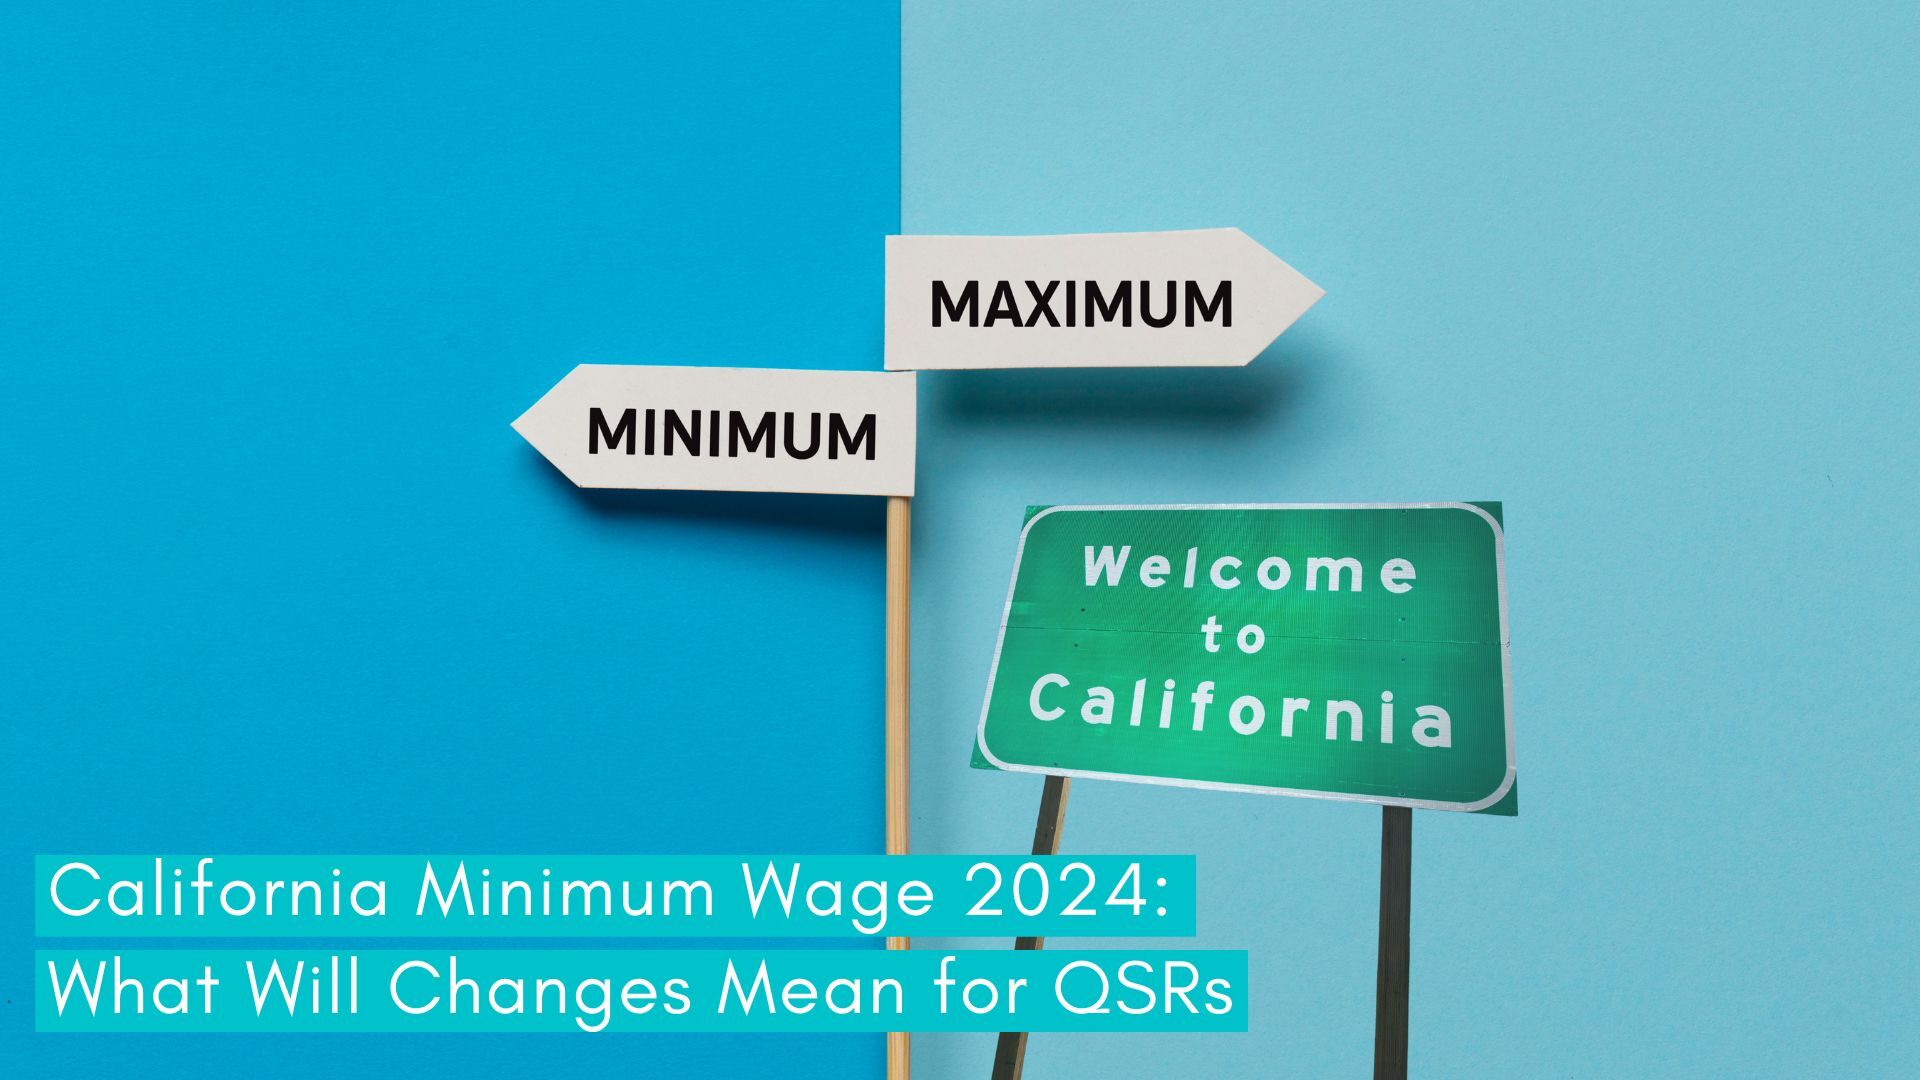 California's New Wage Law Sparks Hope: How $20 Per Hour Could Change Lives Across the State